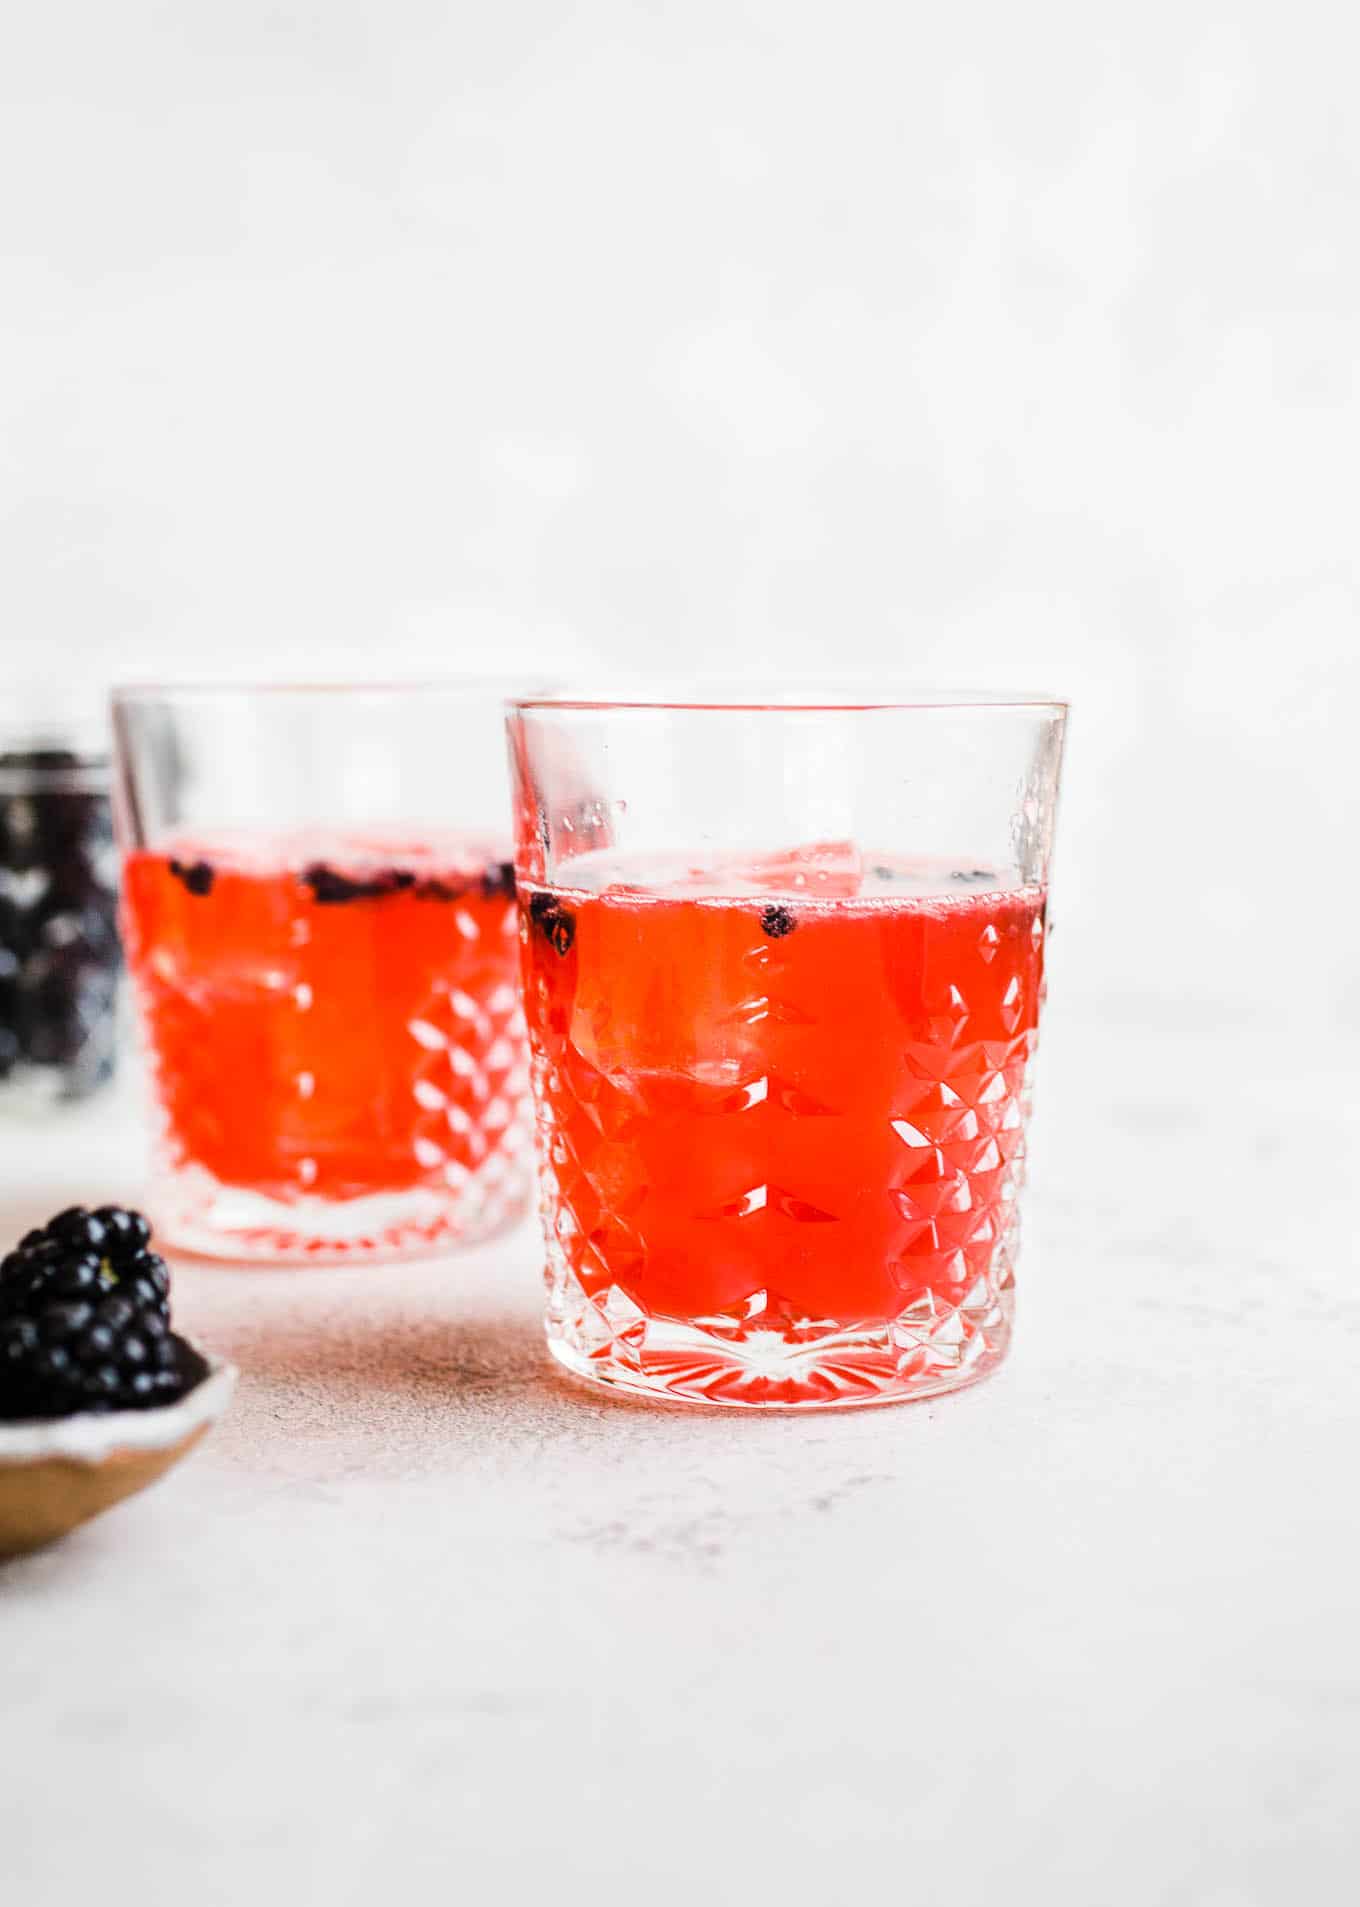 Two glasses with dark pink liquid and blackberries as garnish.